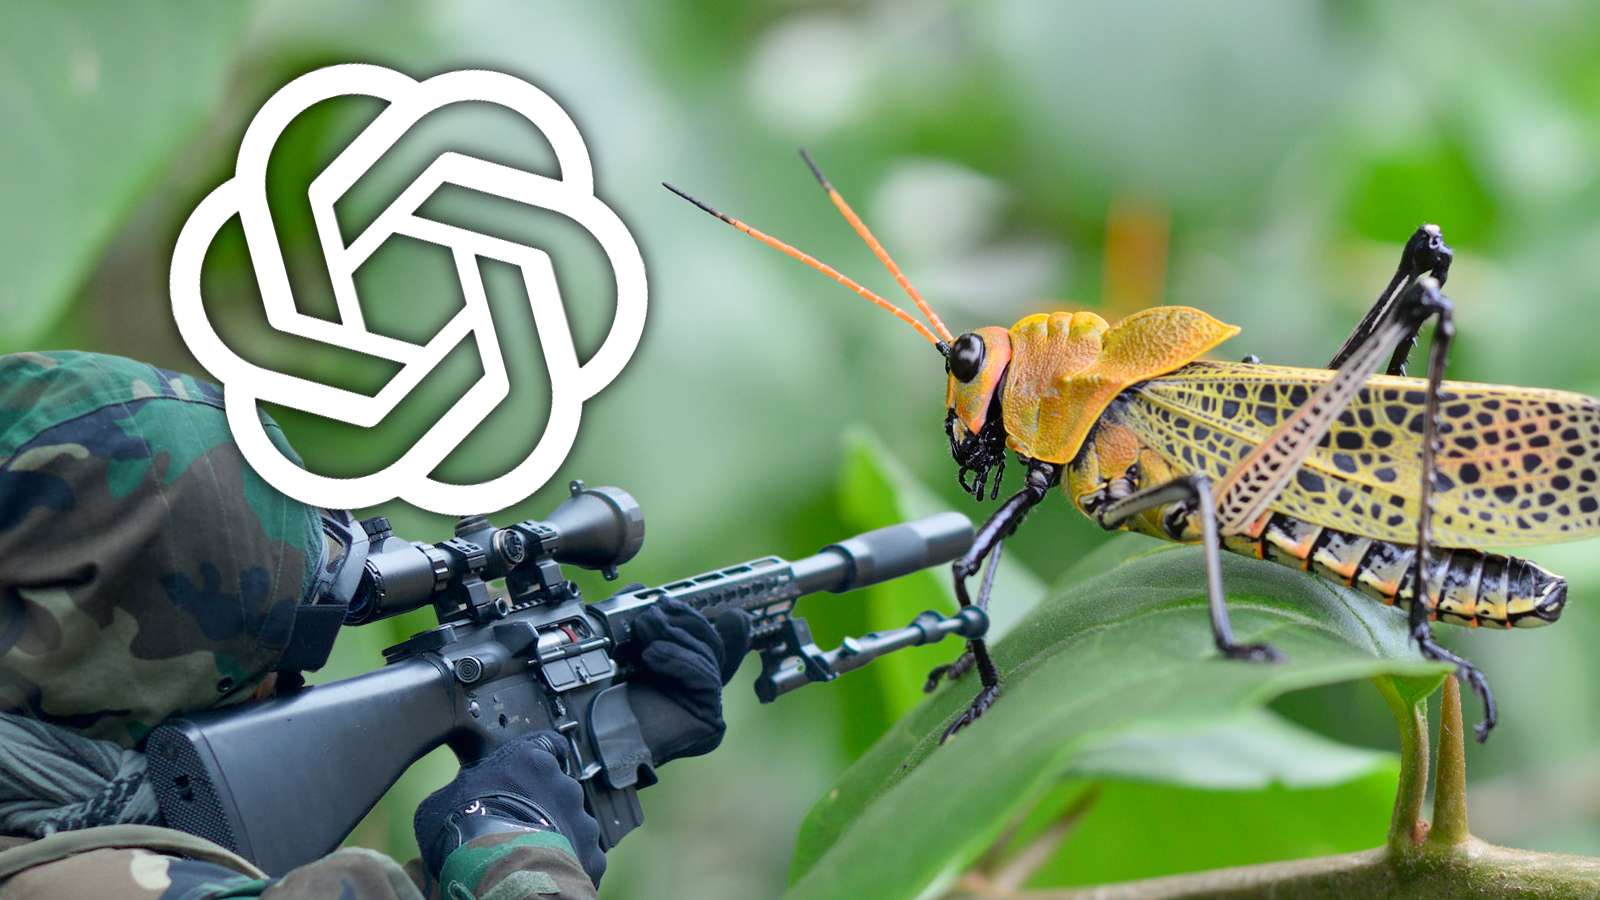 openai chatgpt bug bounty represented by a bug being aimed at by a sniper